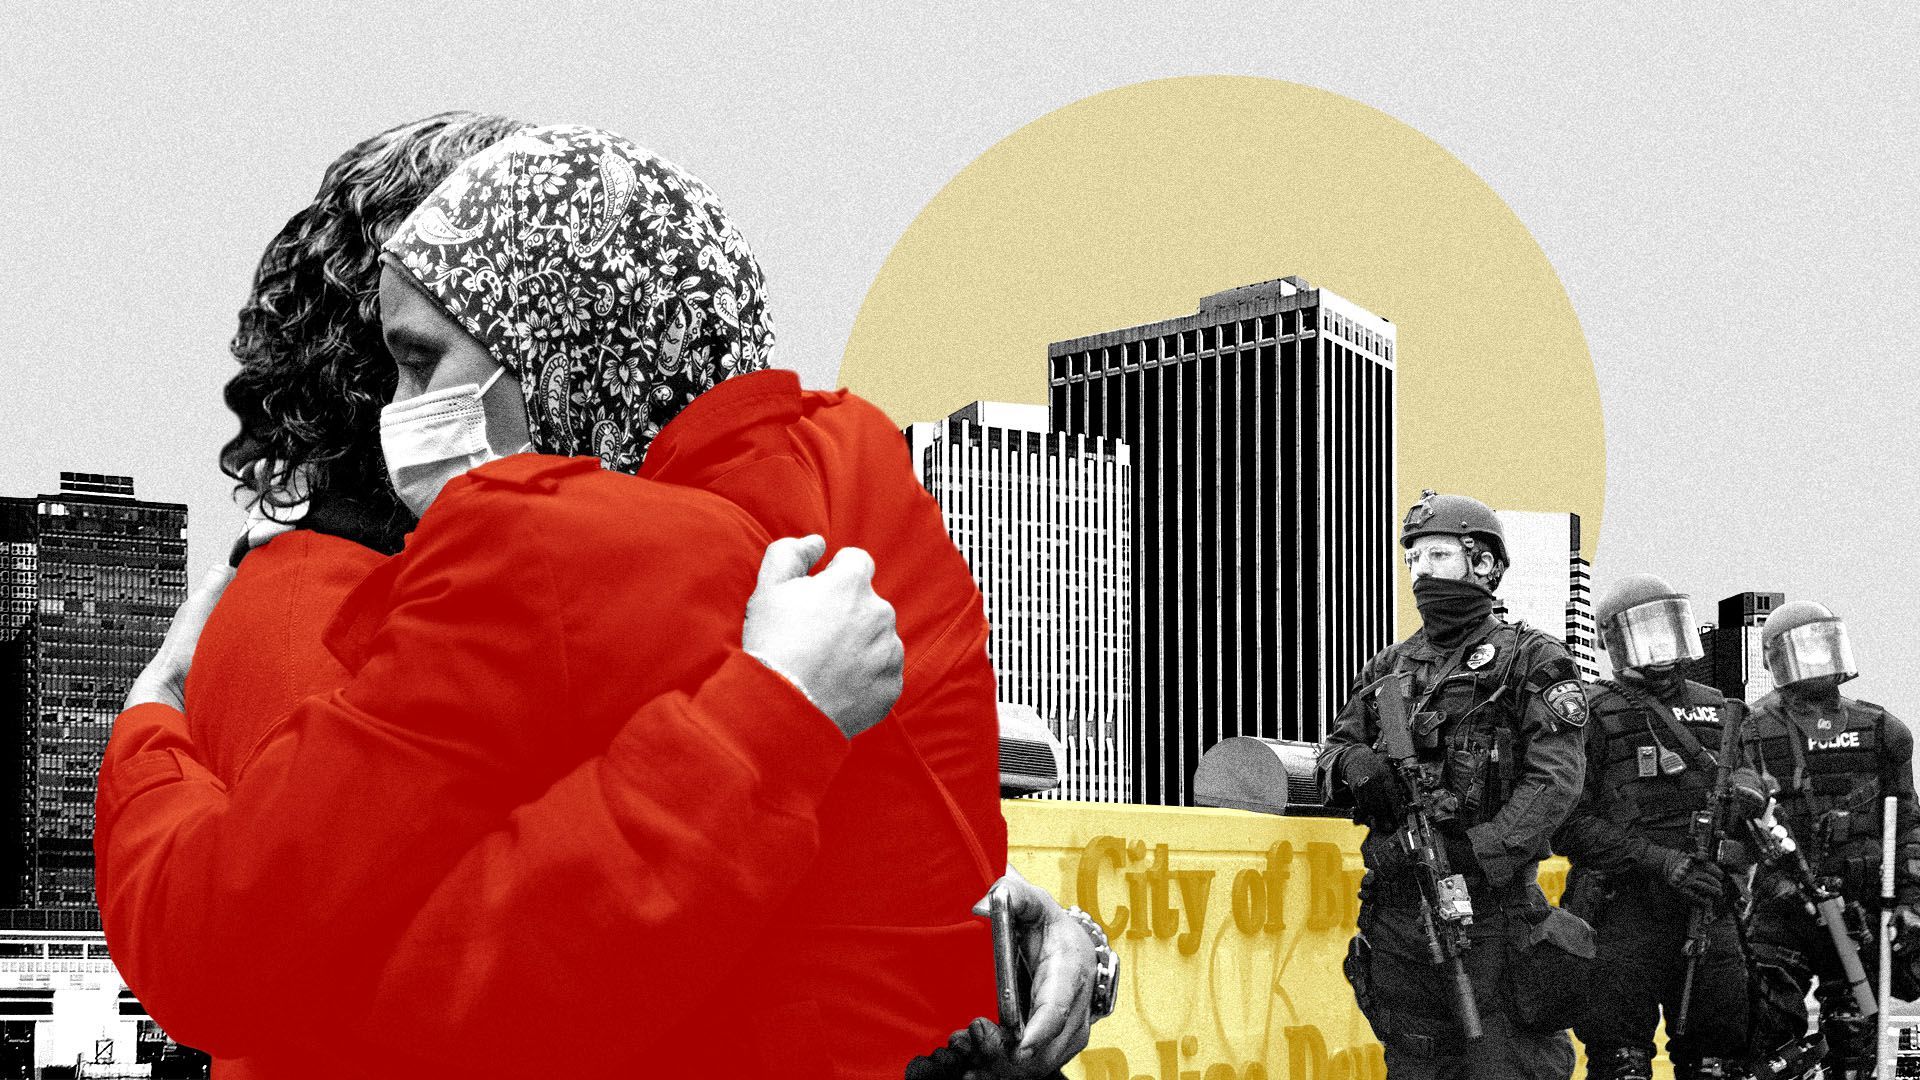 Photo illustration of a city skyline with gun violence victims embracing in the foreground and police in the background